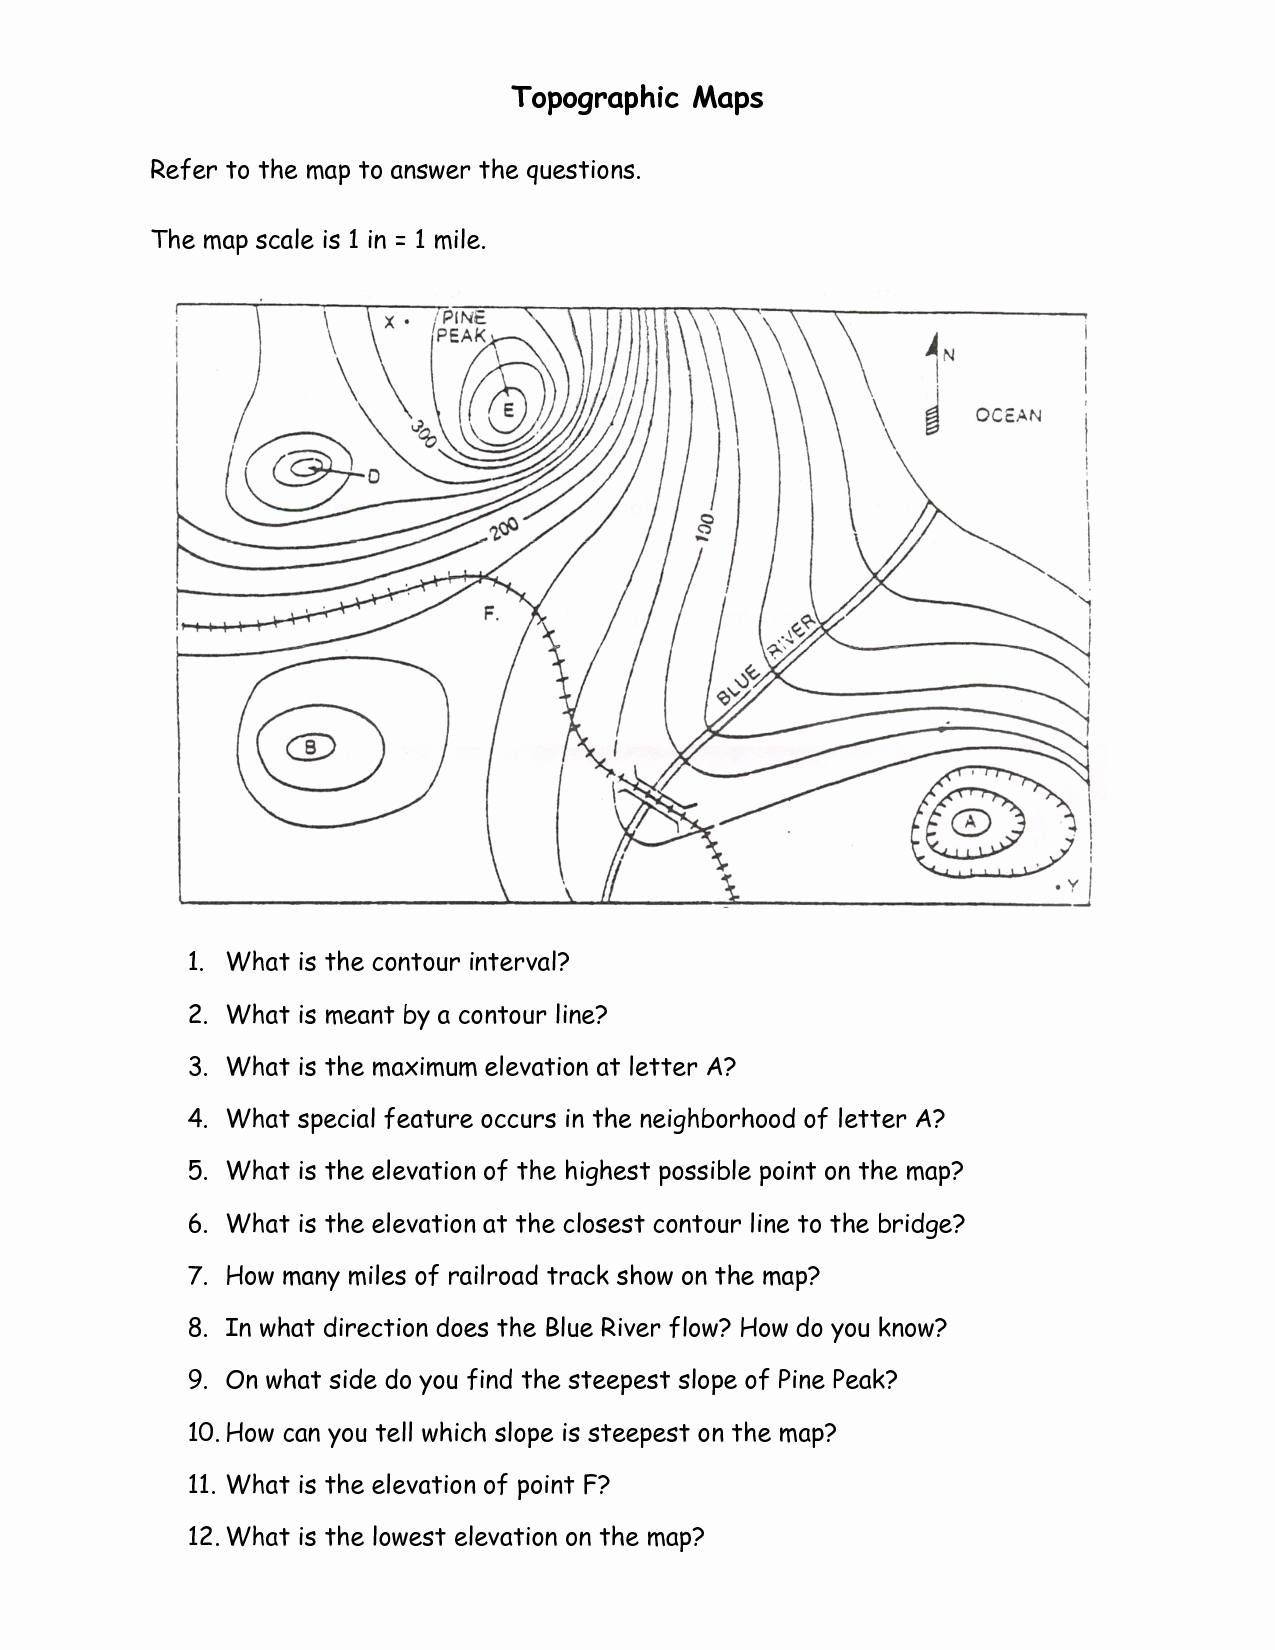 Topographic Map Reading Worksheet Answers Awesome topographic Map Reading Worksheet Answers